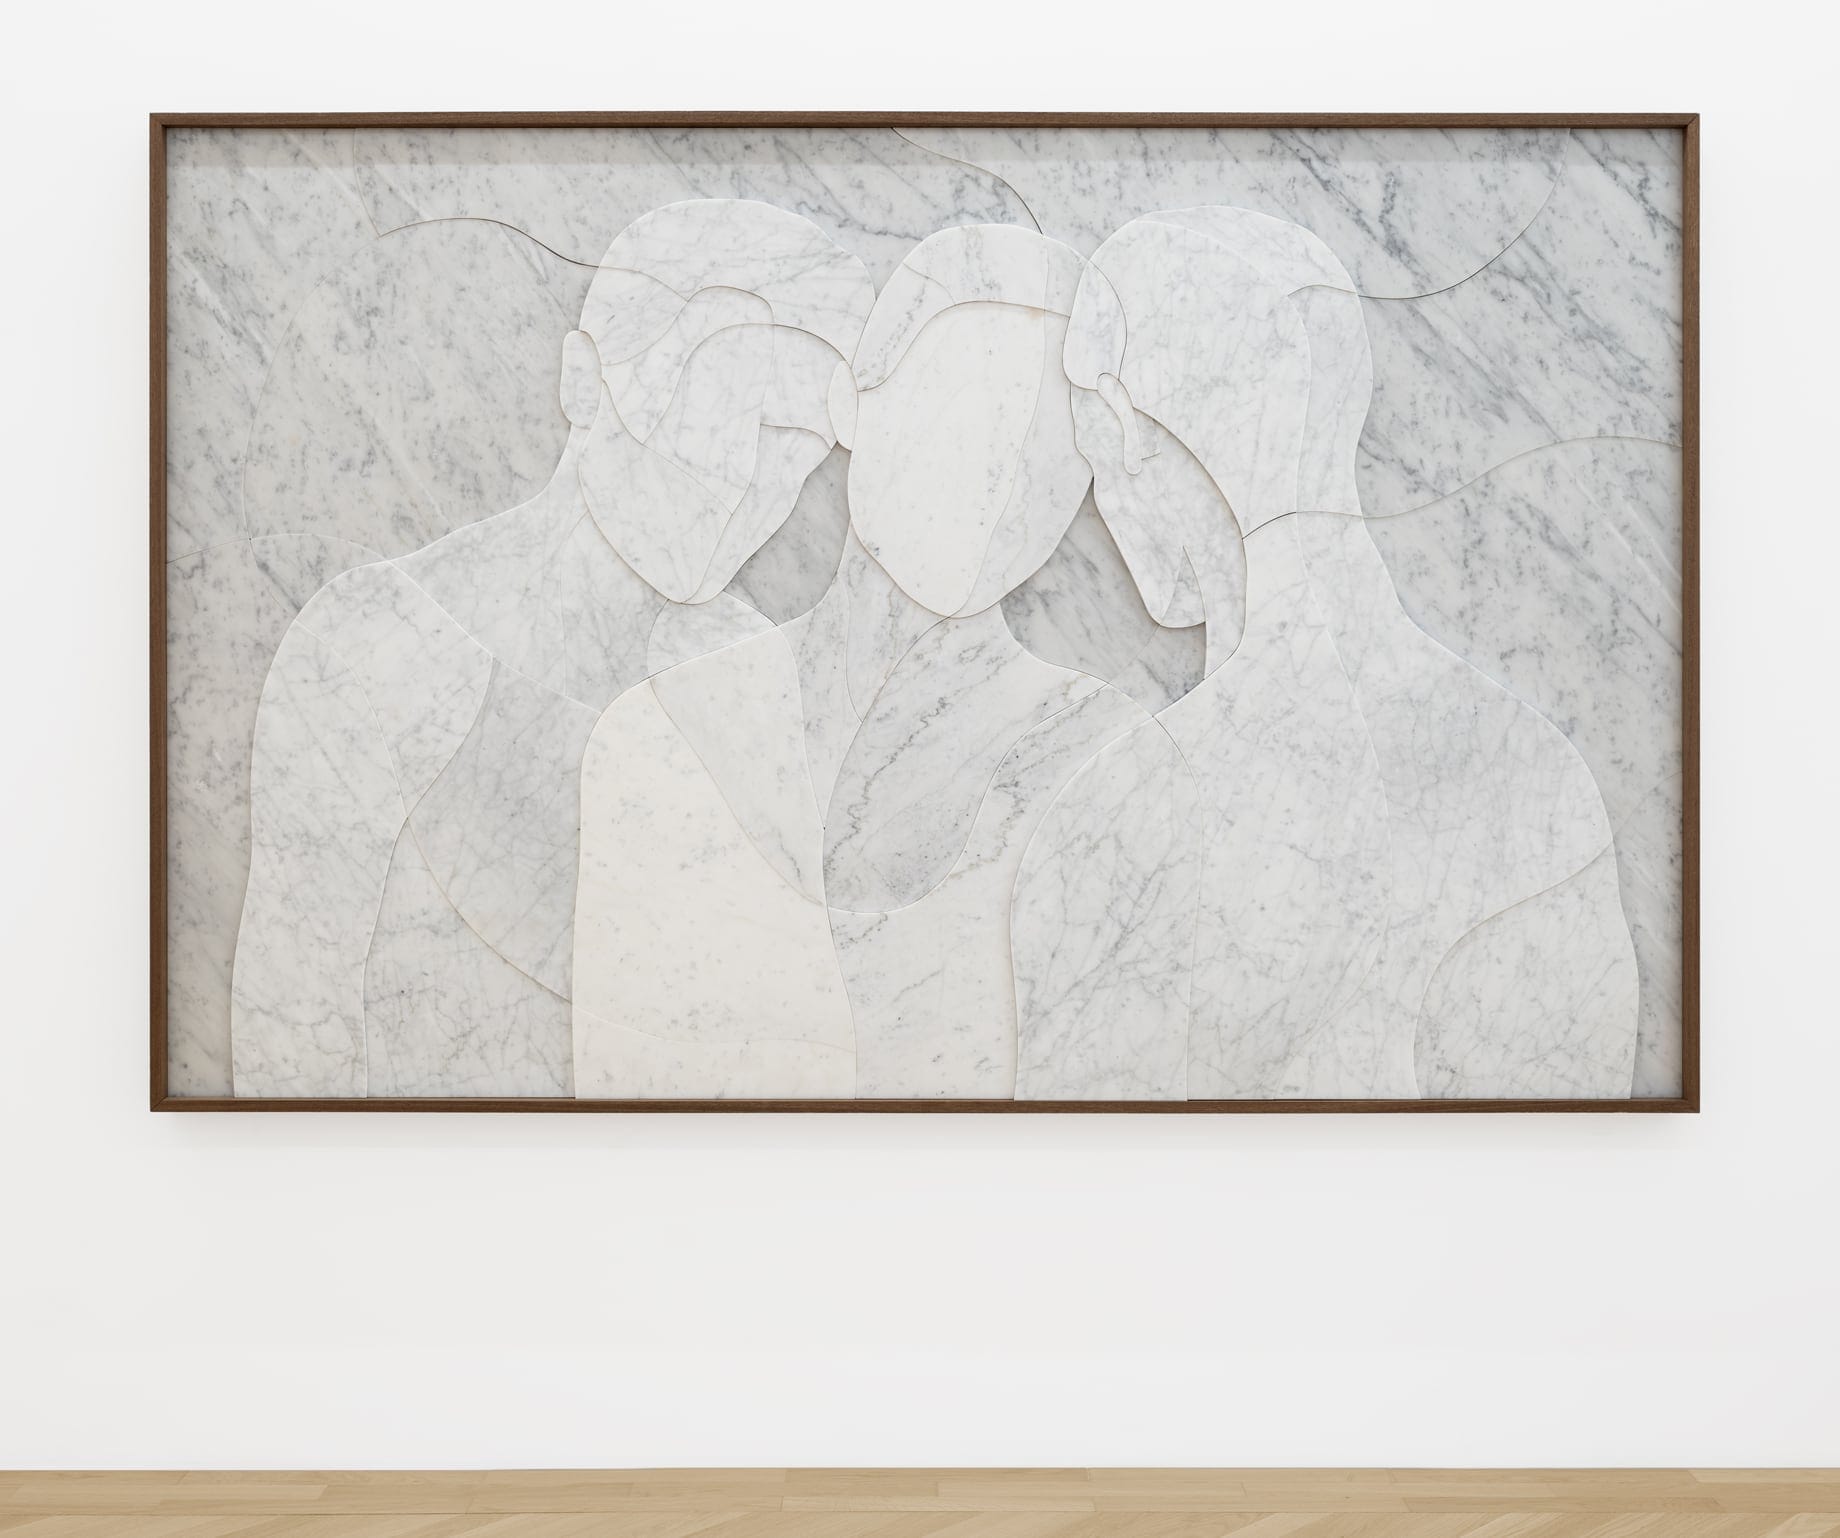 a portrait of three faceless figures made of marble